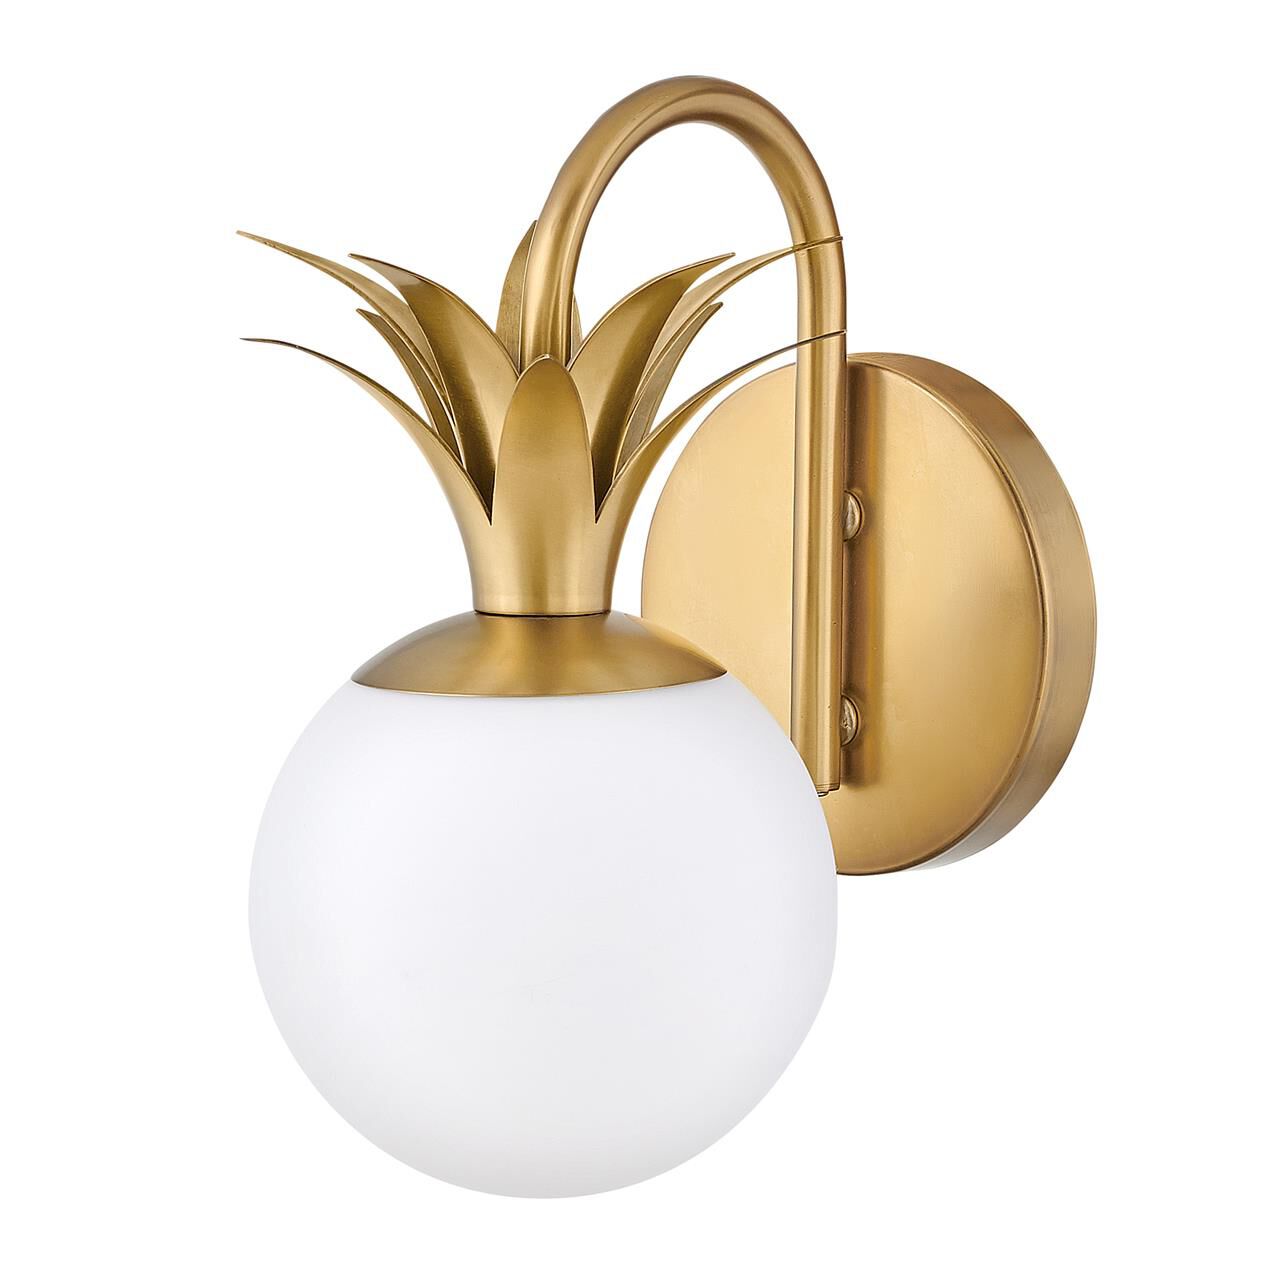 Photos - Chandelier / Lamp Hinkley Lighting Palma 10 Inch LED Wall Sconce Palma - 54150HB - Tropical 